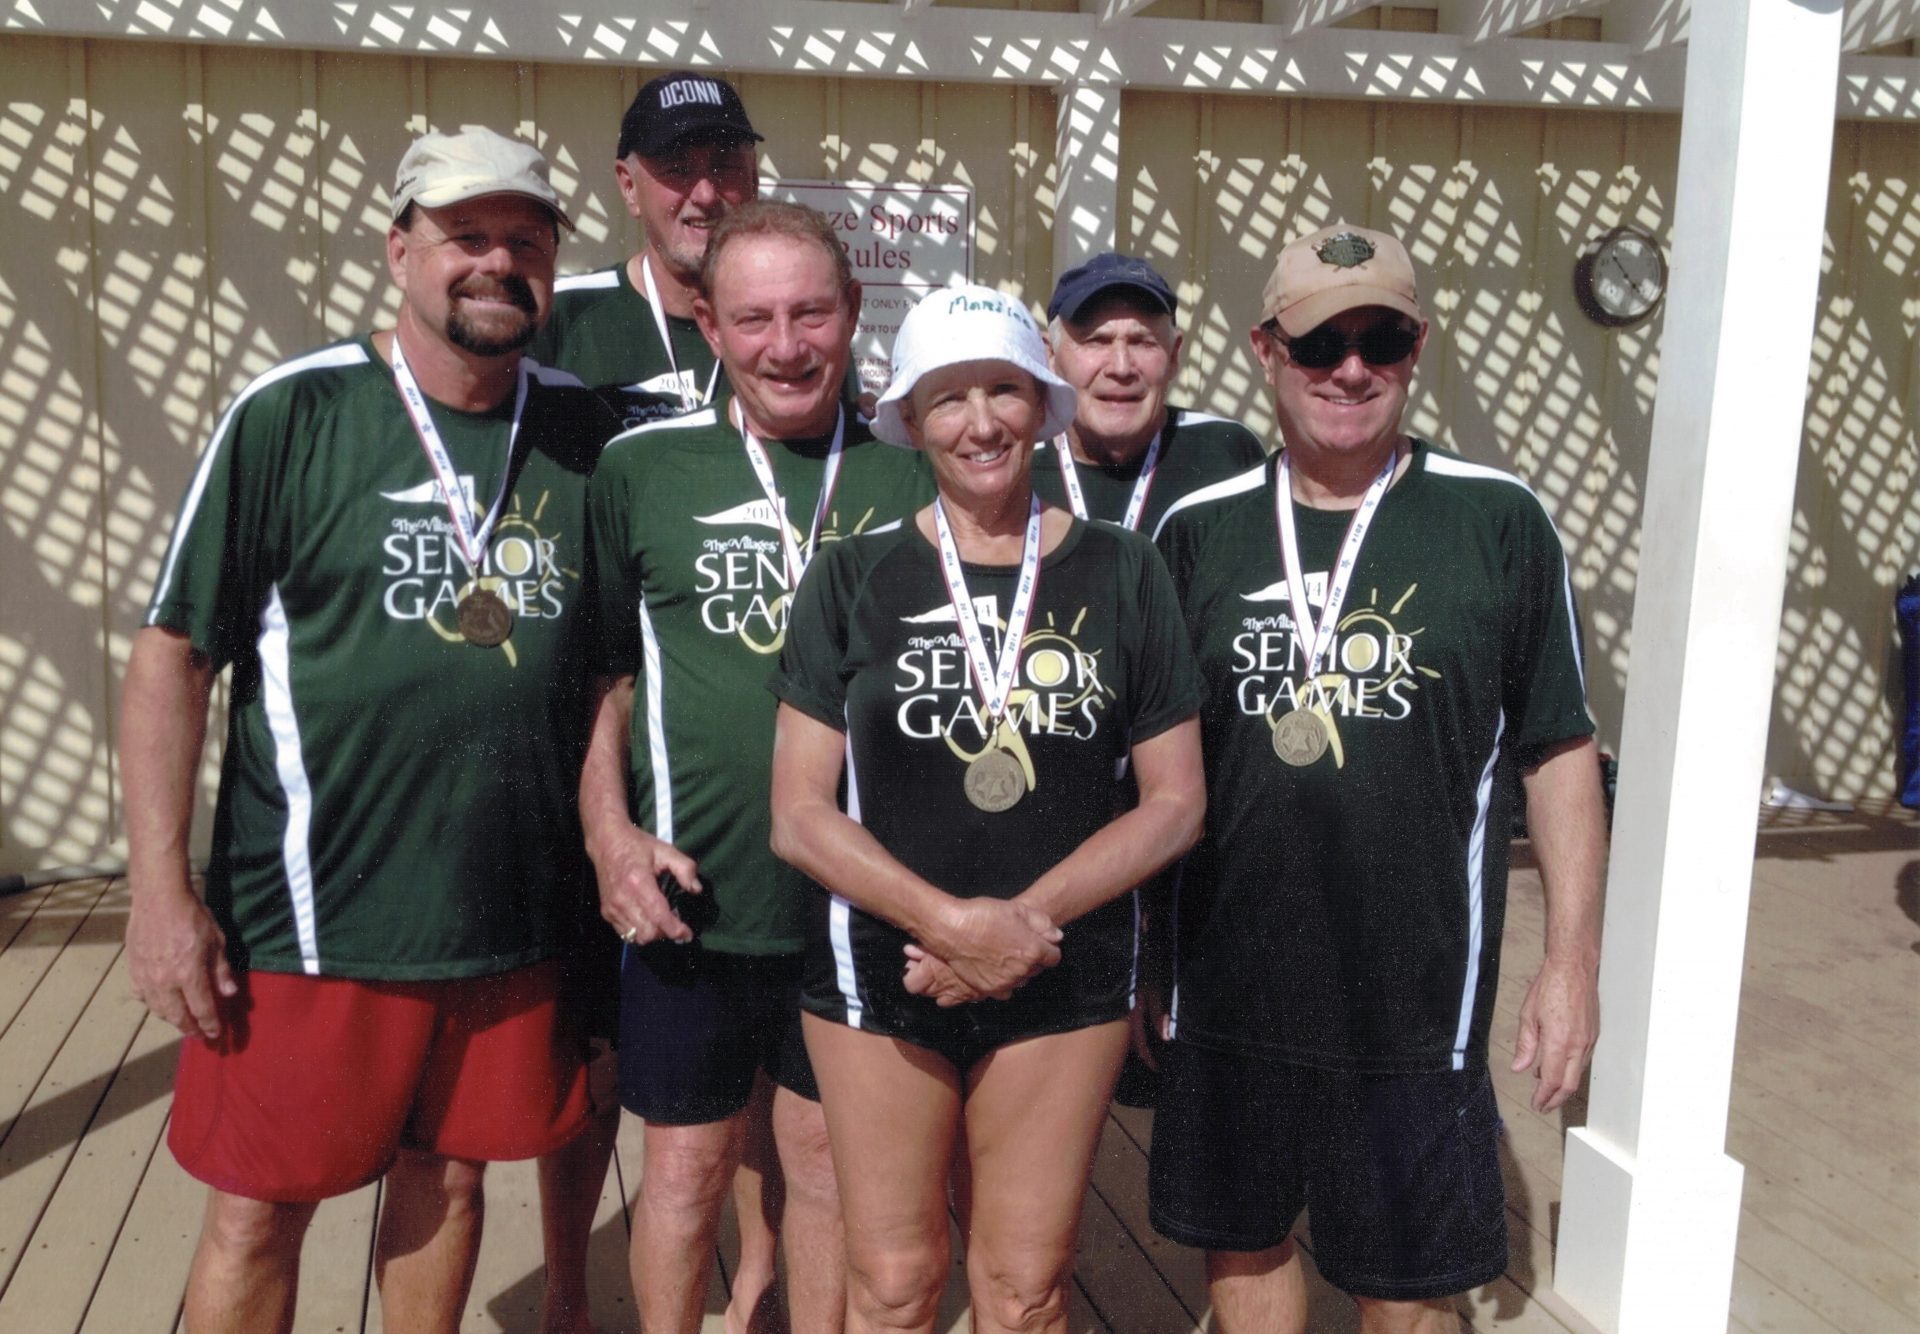 One of Michael’s favorite activities, water volleyball. In The Villages Senior Games of 2014, Michael anchored the Gold Medal winning Intermediate team. L-R Michael Gavigan, Larry Cohen, Stu Kaufman, Merilee Fisk, Art Rogers and Eric Ehlers. RIP Michael.